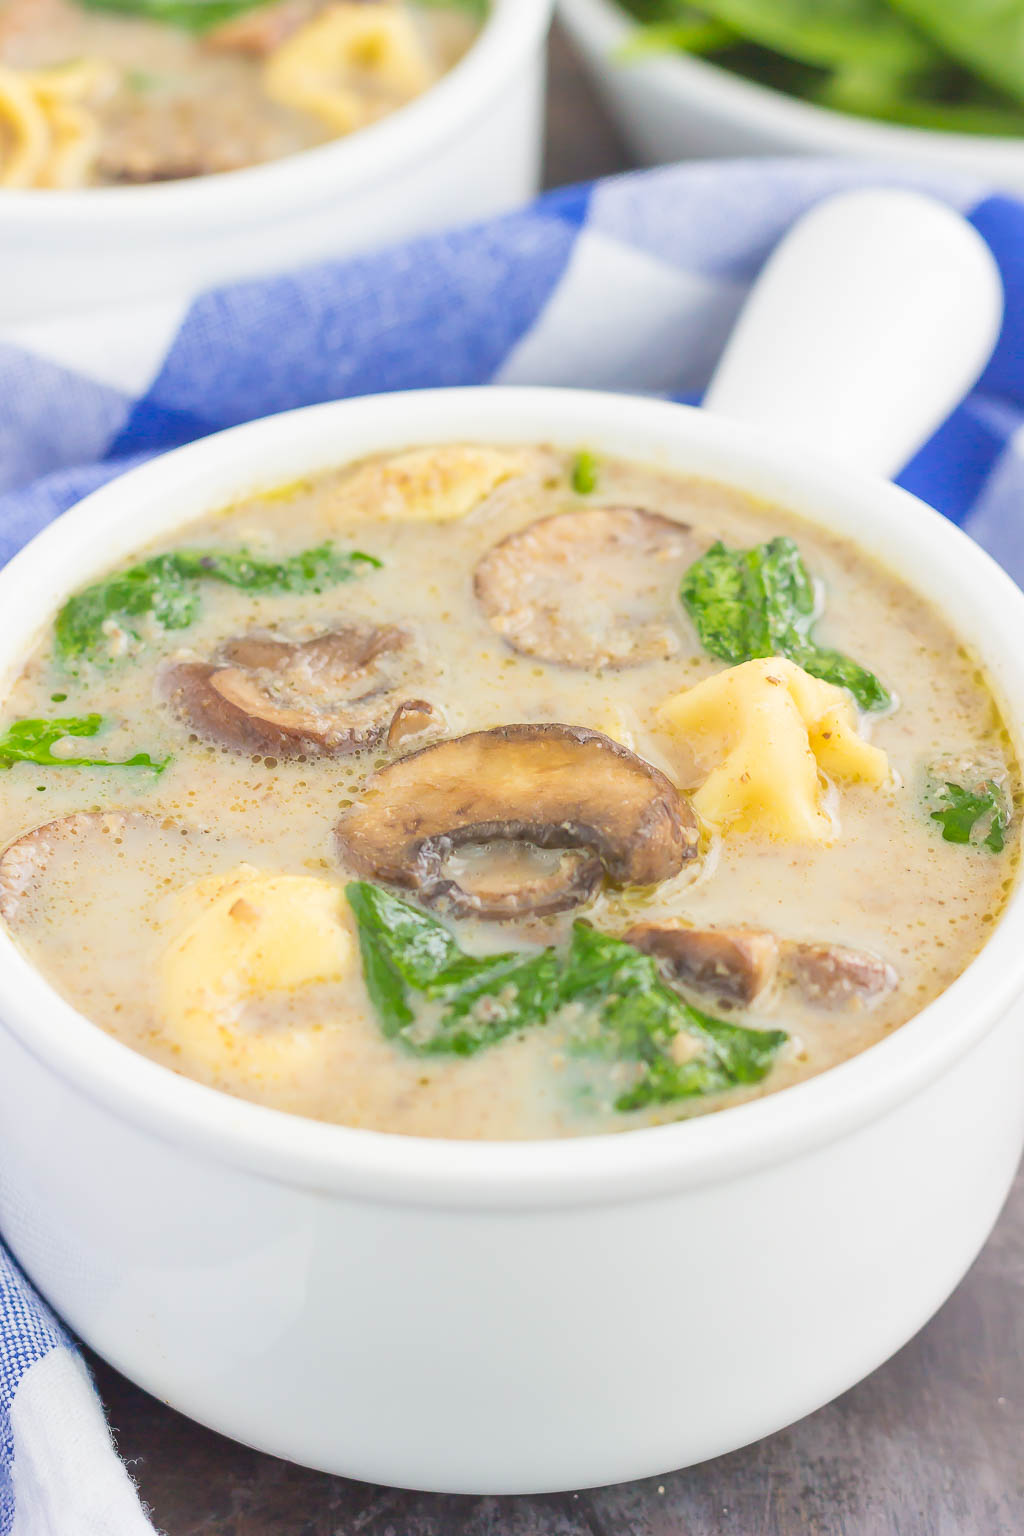 This Creamy Mushroom and Spinach Tortellini Soup is made in one pot and ready in just 30 minutes. Packed with fresh mushrooms, cheese tortellini, and baby spinach, this soup is creamy, comforting, and will warm you right up!